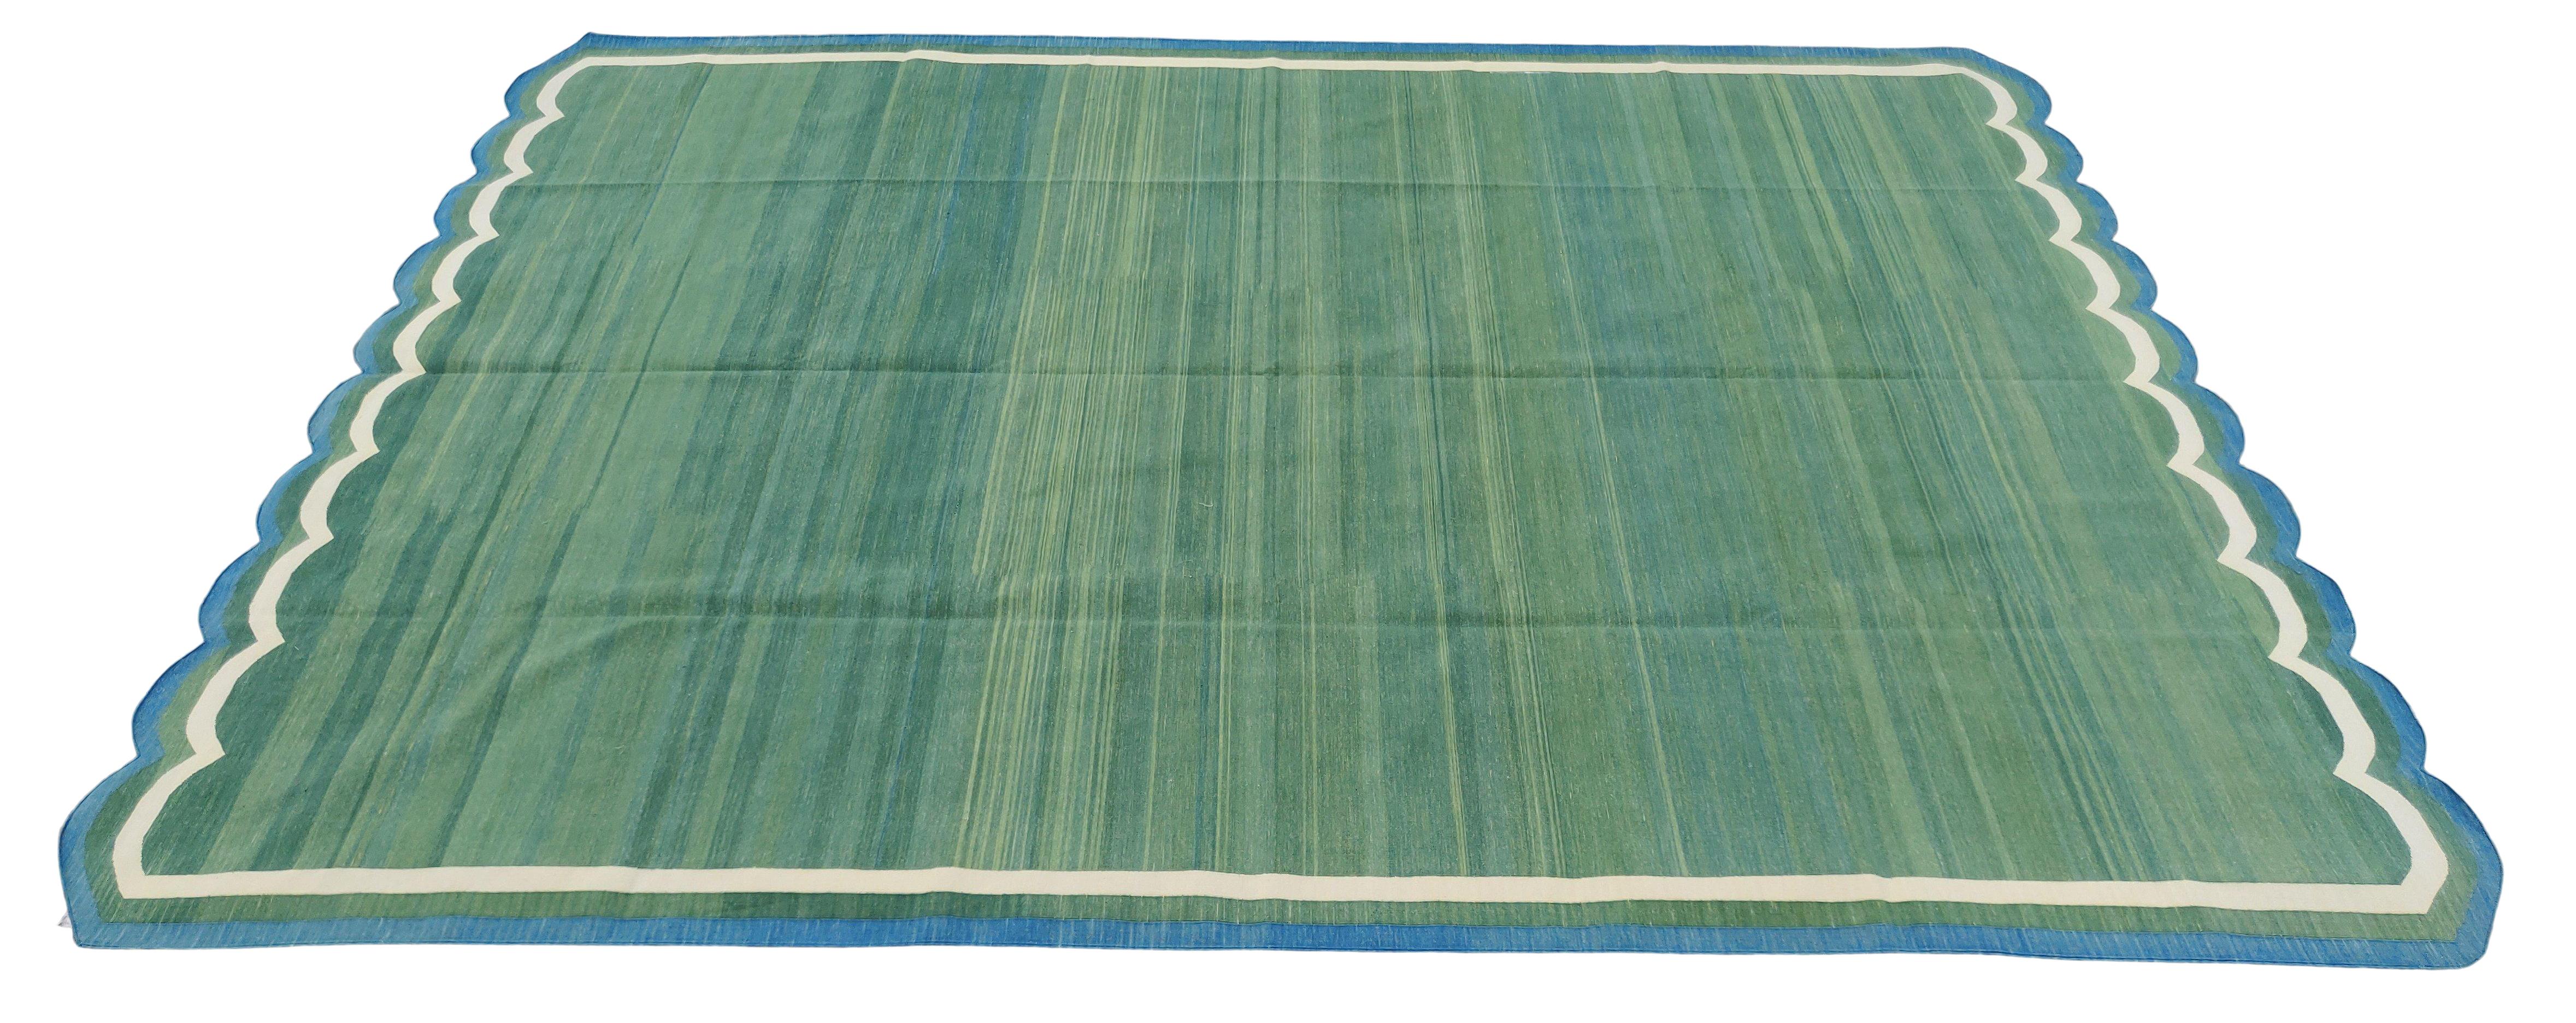 Cotton Vegetable Dyed Forest Green, Cream And Teal Blue Two Sided Scalloped Rug-10'x14' 
(Scallops runs on all 10 Feet Sides)
These special flat-weave dhurries are hand-woven with 15 ply 100% cotton yarn. Due to the special manufacturing techniques